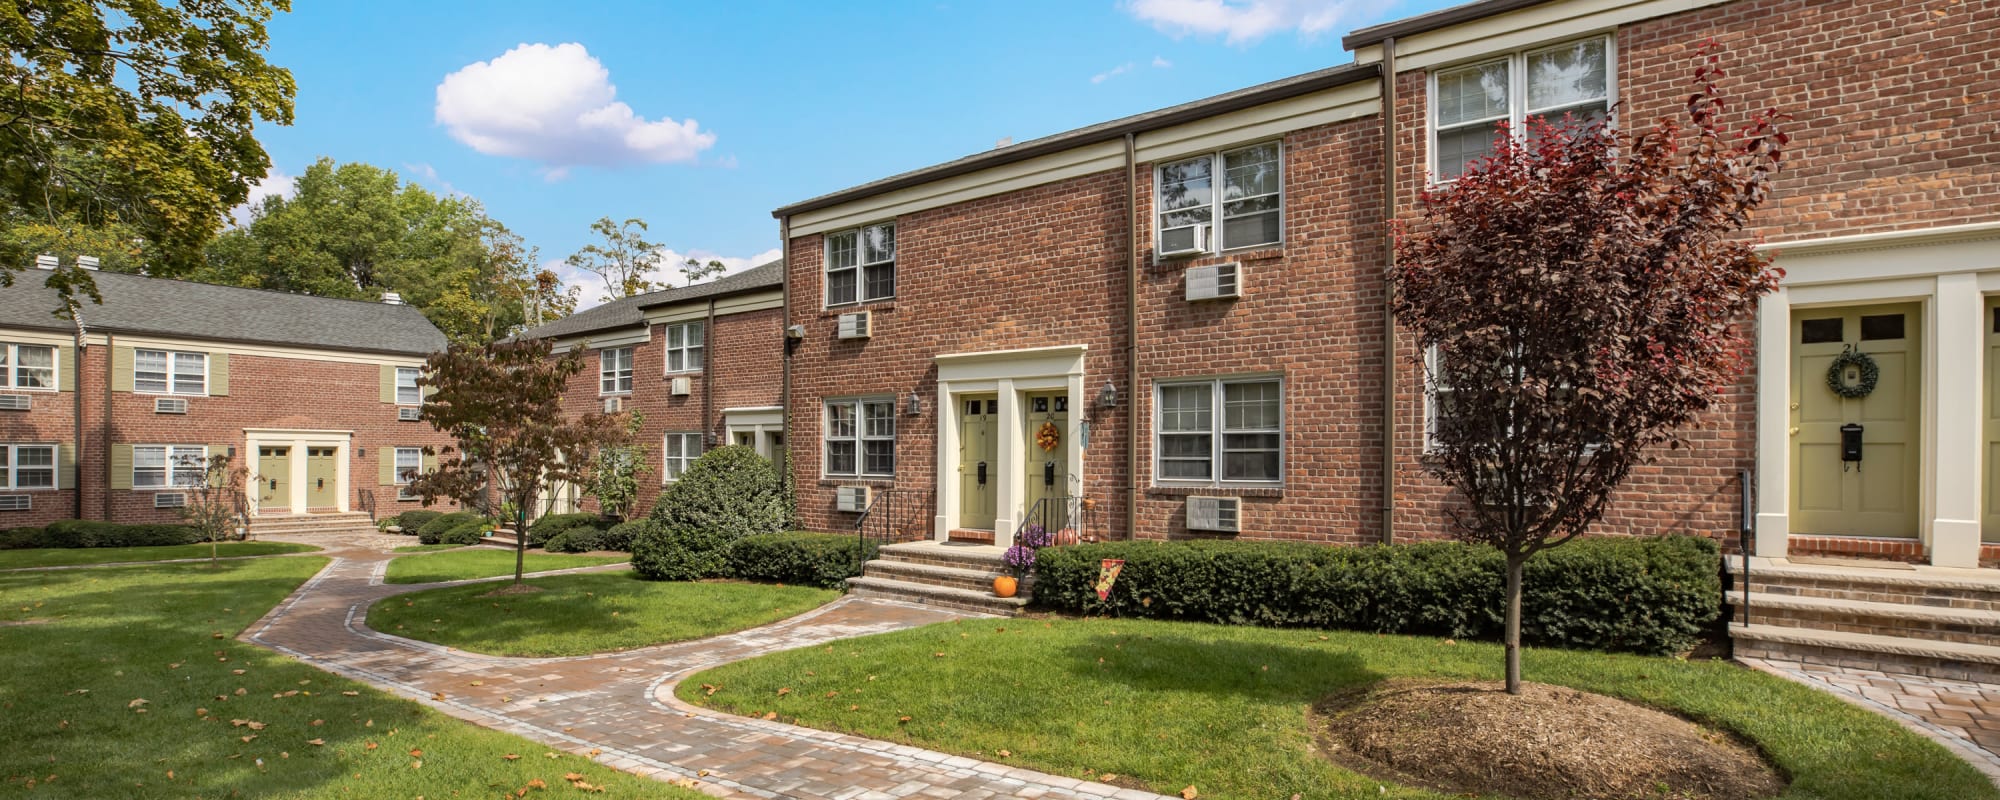 Schedule a tour to see General Wayne Townhomes and Ridgedale Gardens in Madison, New Jersey